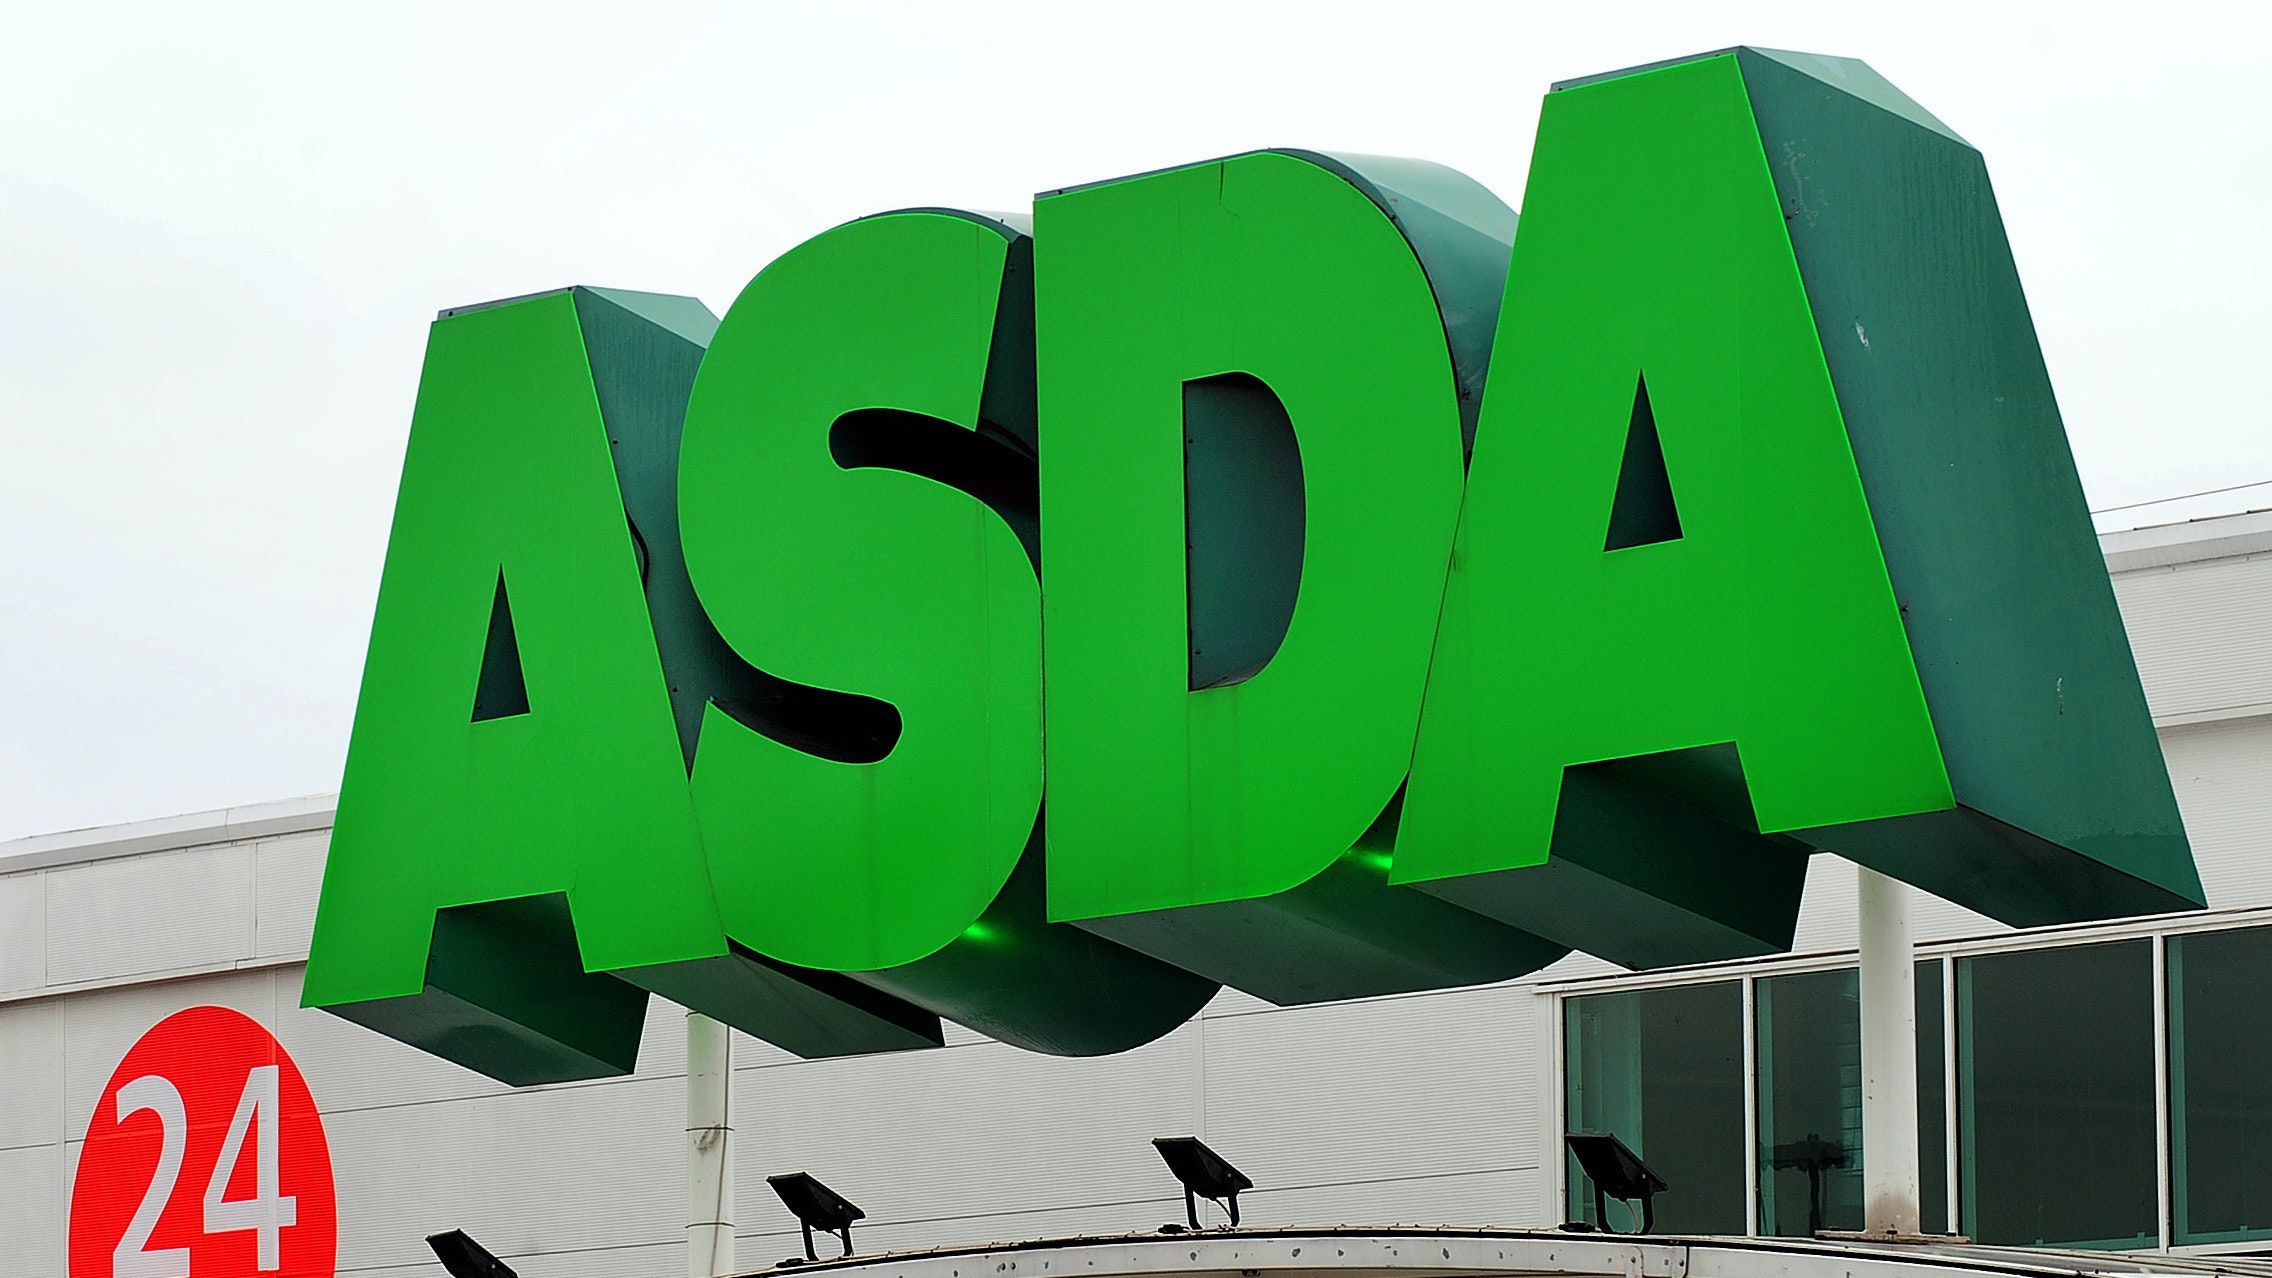 Jolly Hog rolling into Asda as sales forecast for 2021 hits £20m, News